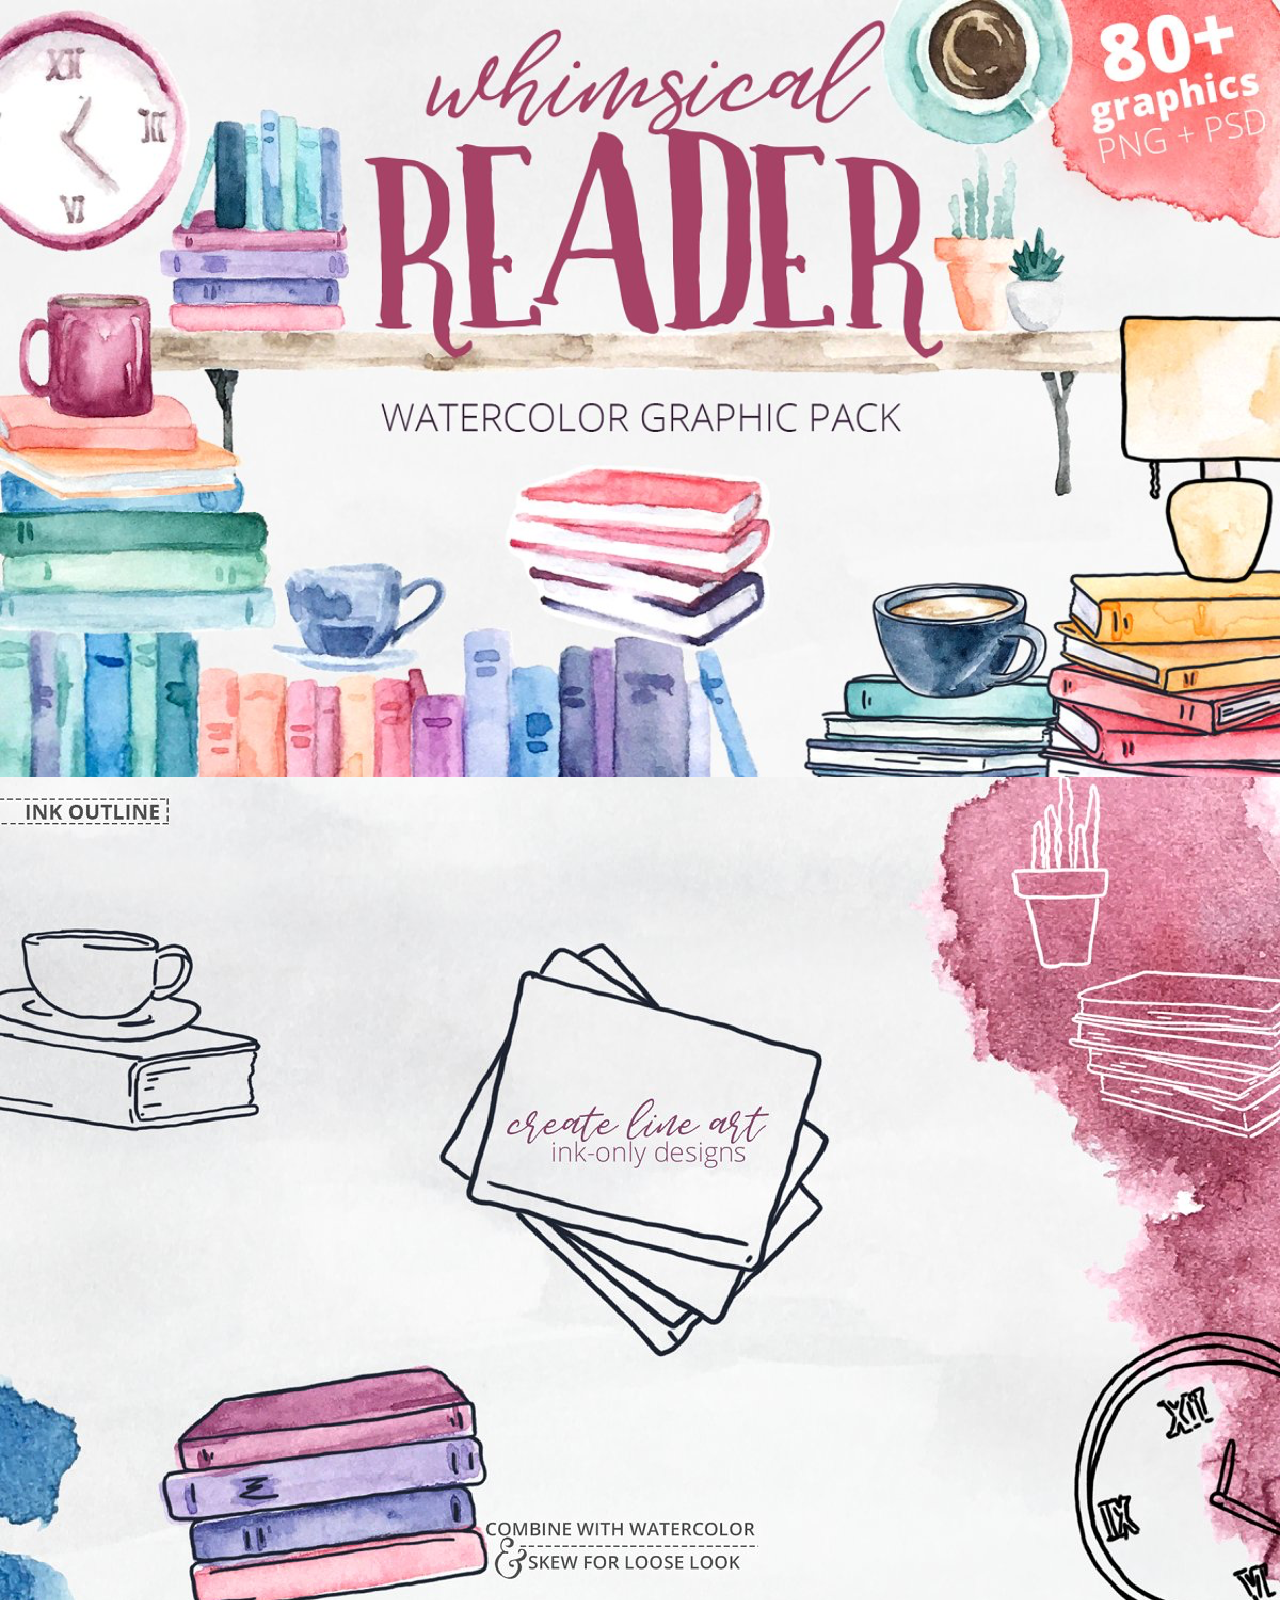 Whimsical reader watercolor pack pinterest image preview.